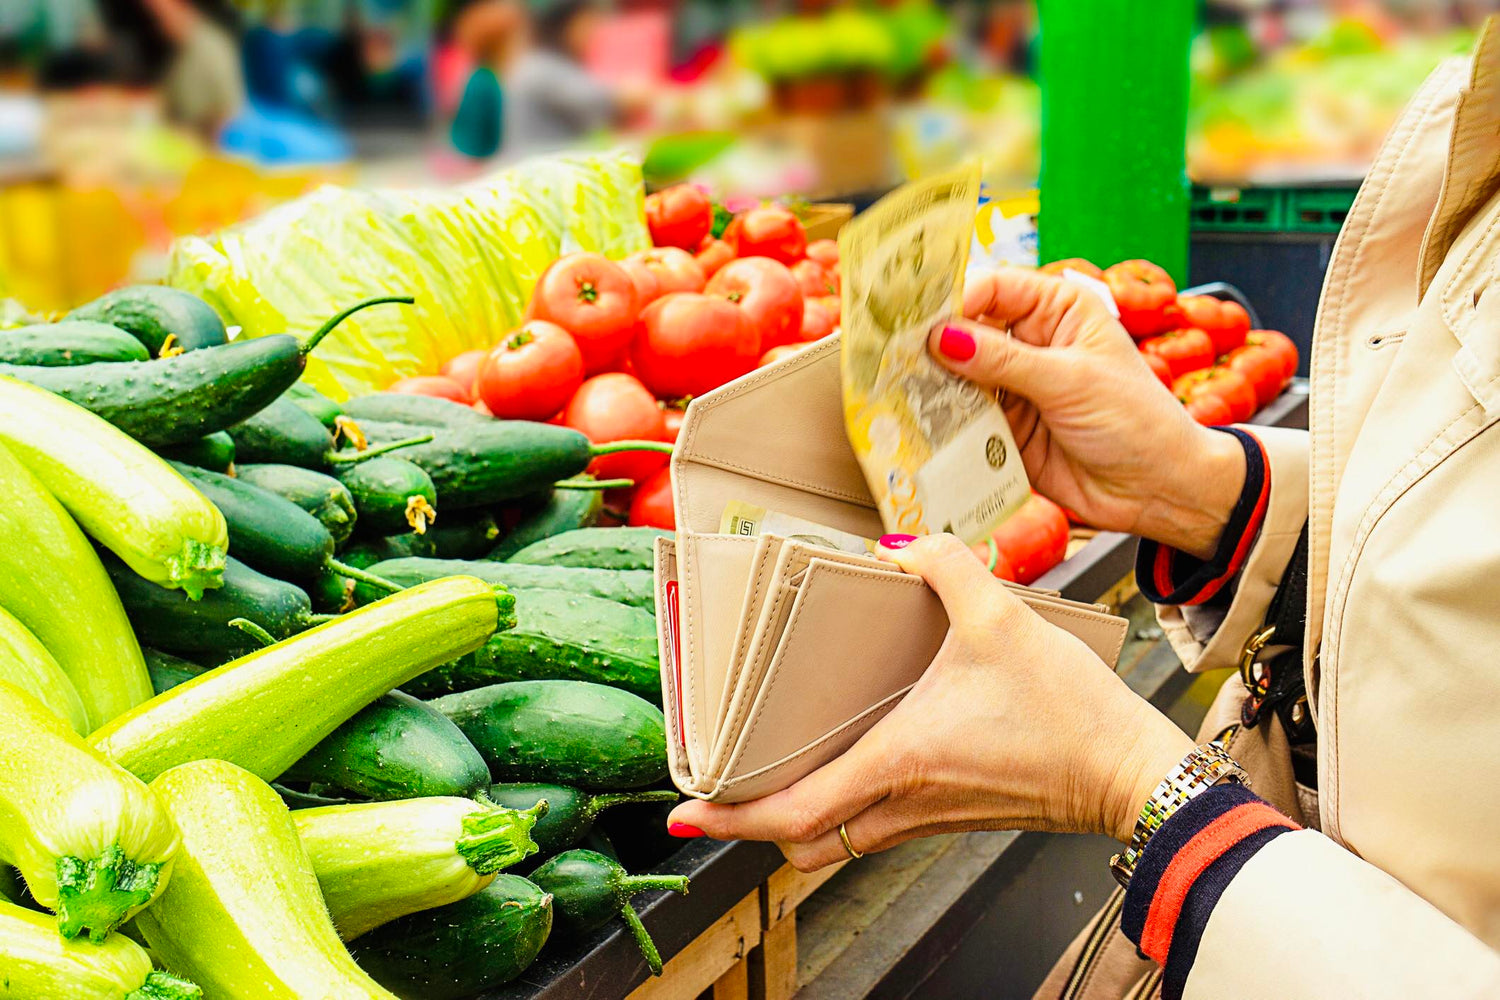 How to shop healthily on a tight budget